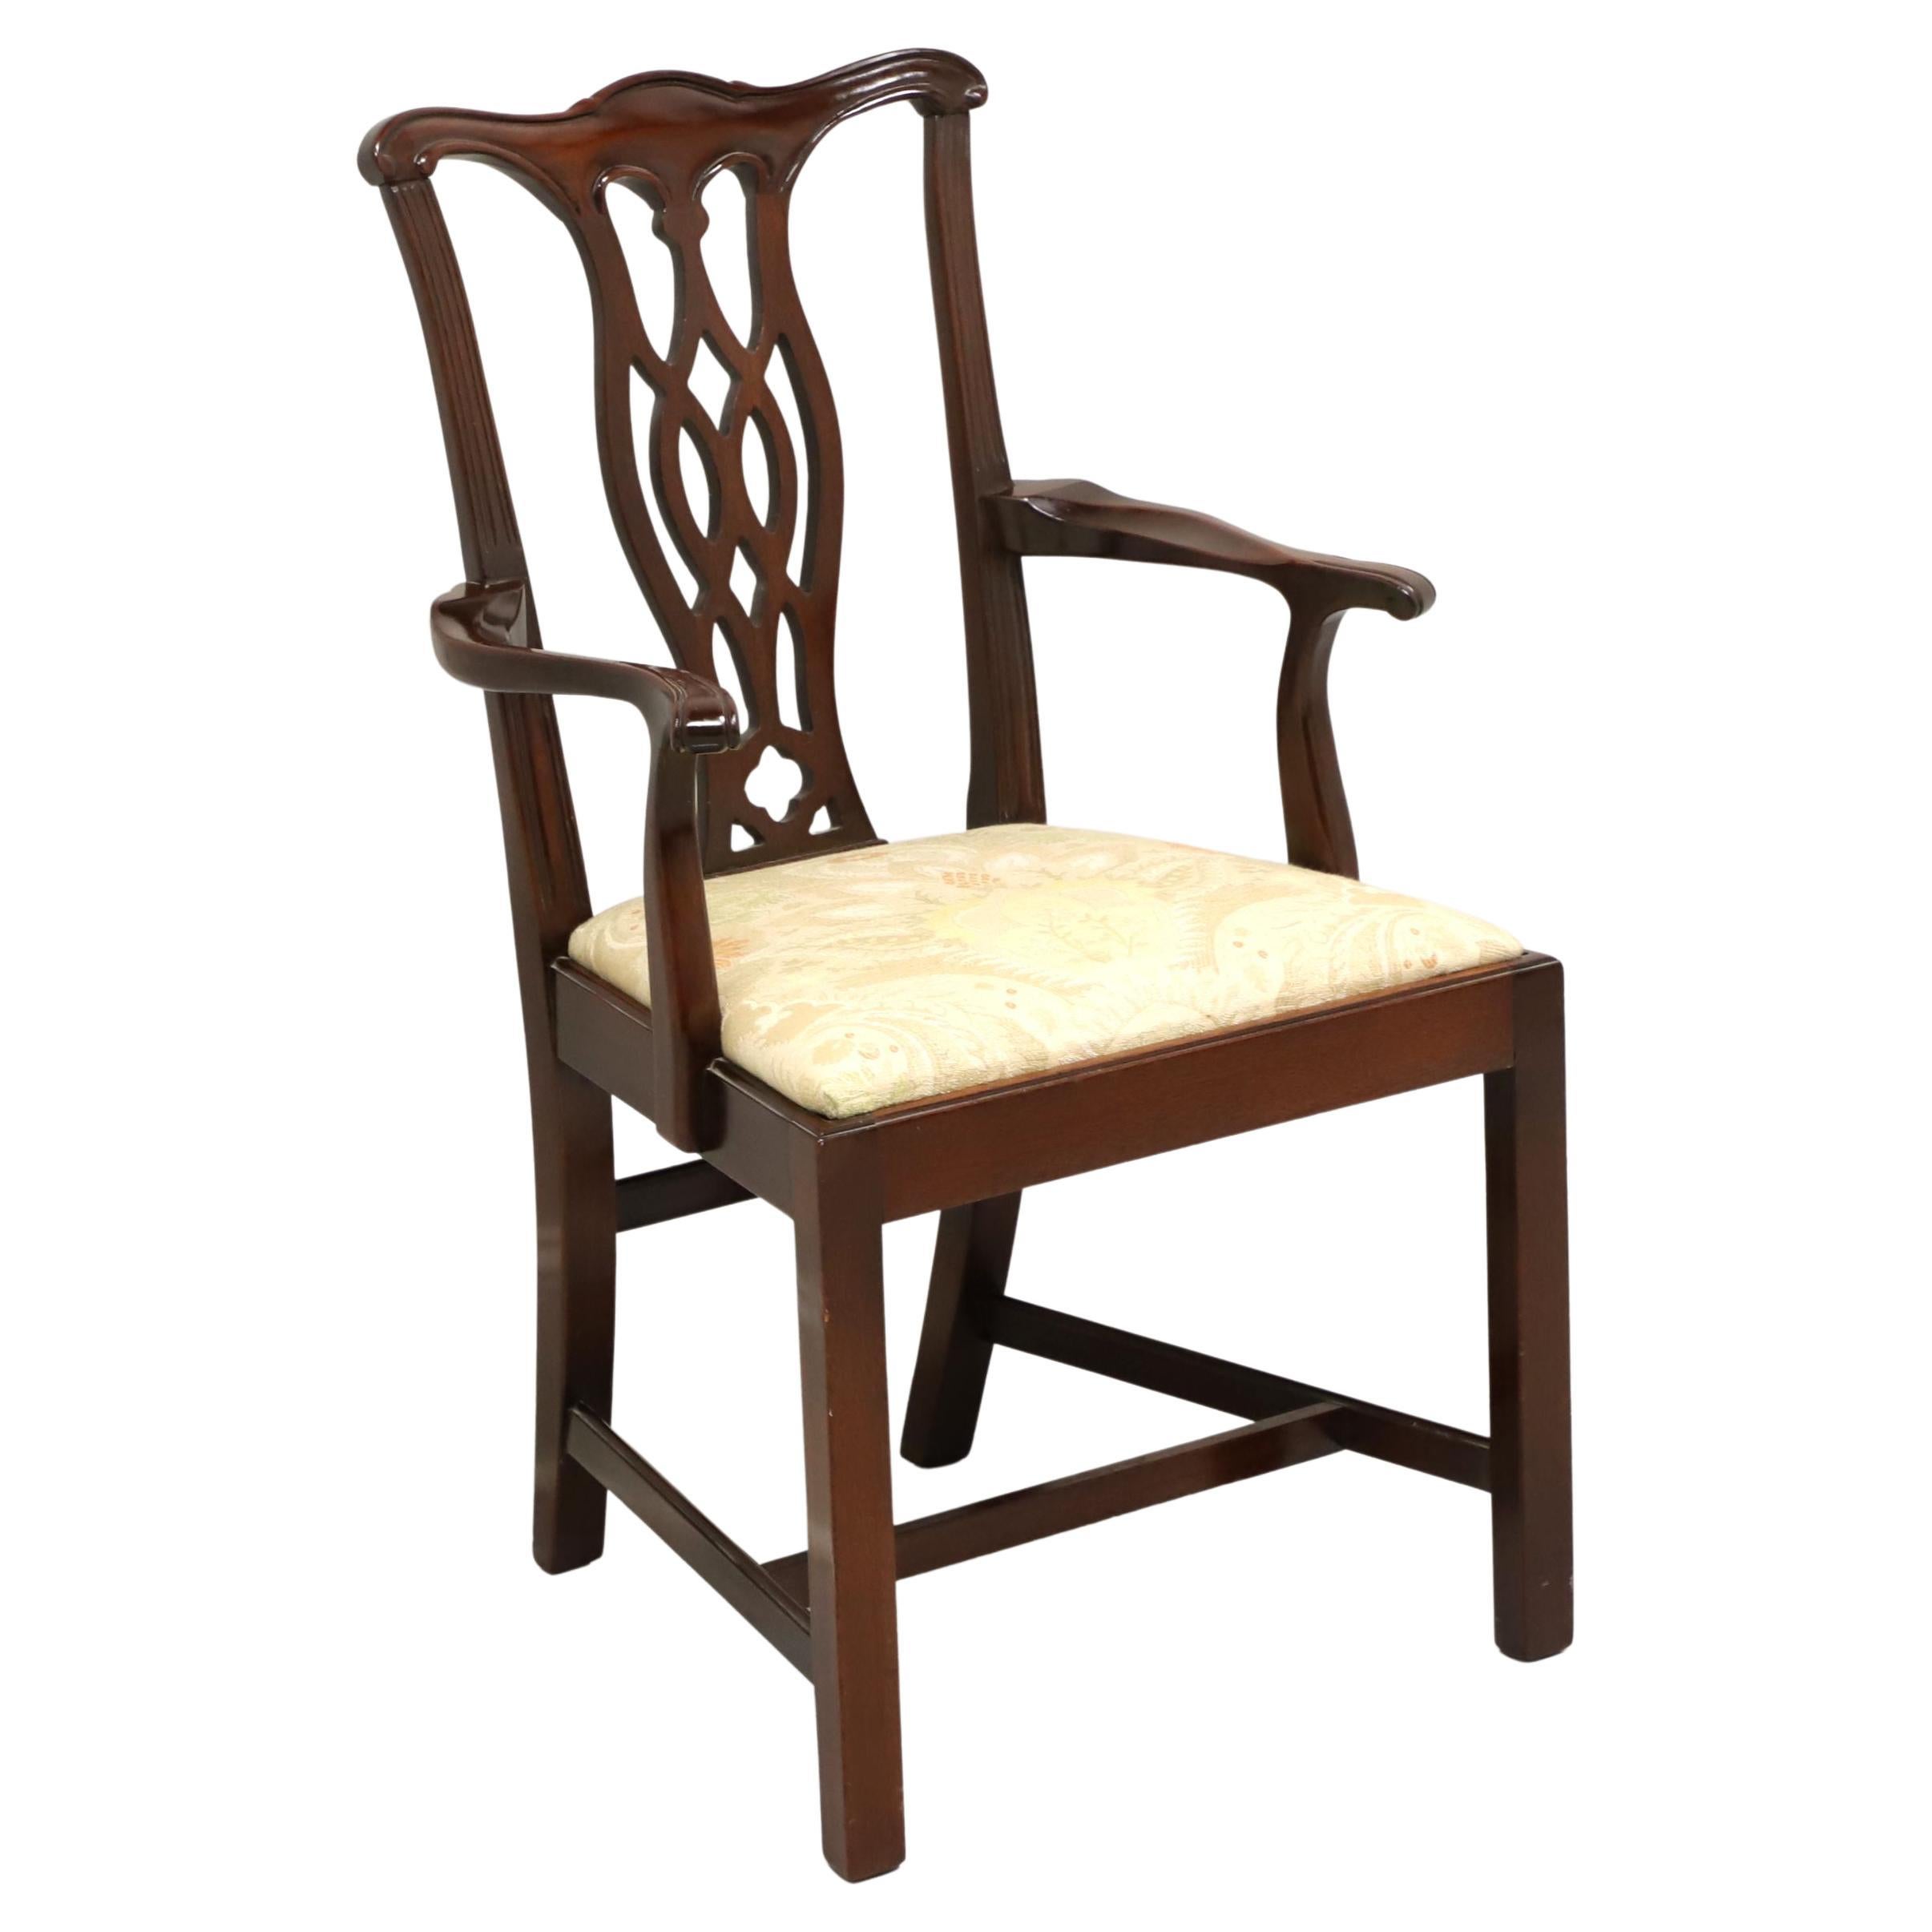 Late 20th Century Solid Mahogany Straight Leg Chippendale Armchair For Sale